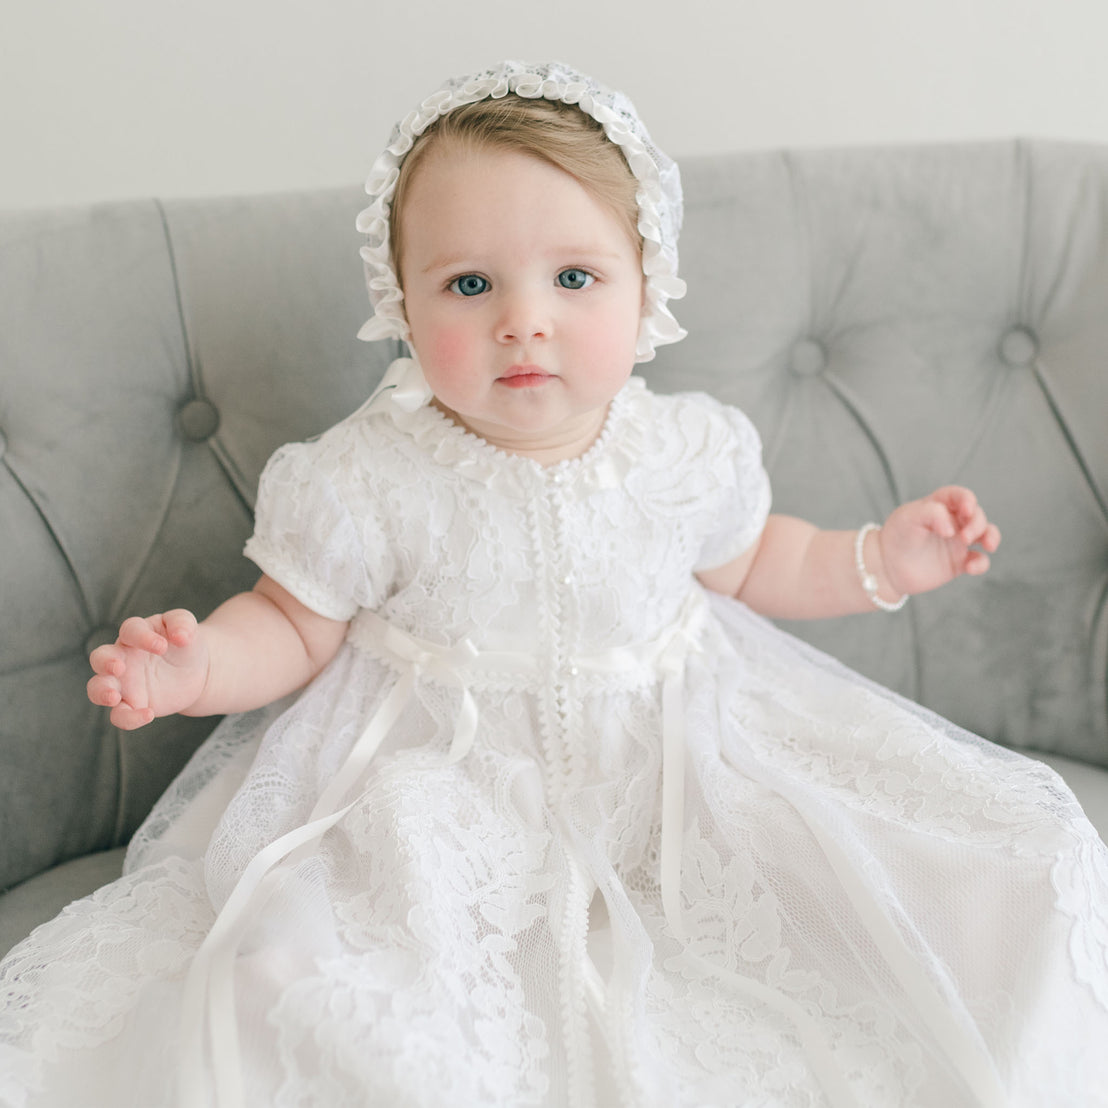 A baby girl with blue eyes wearing the Aria Christening Gown & Bonnet sits on a gray sofa, looking directly at the camera.